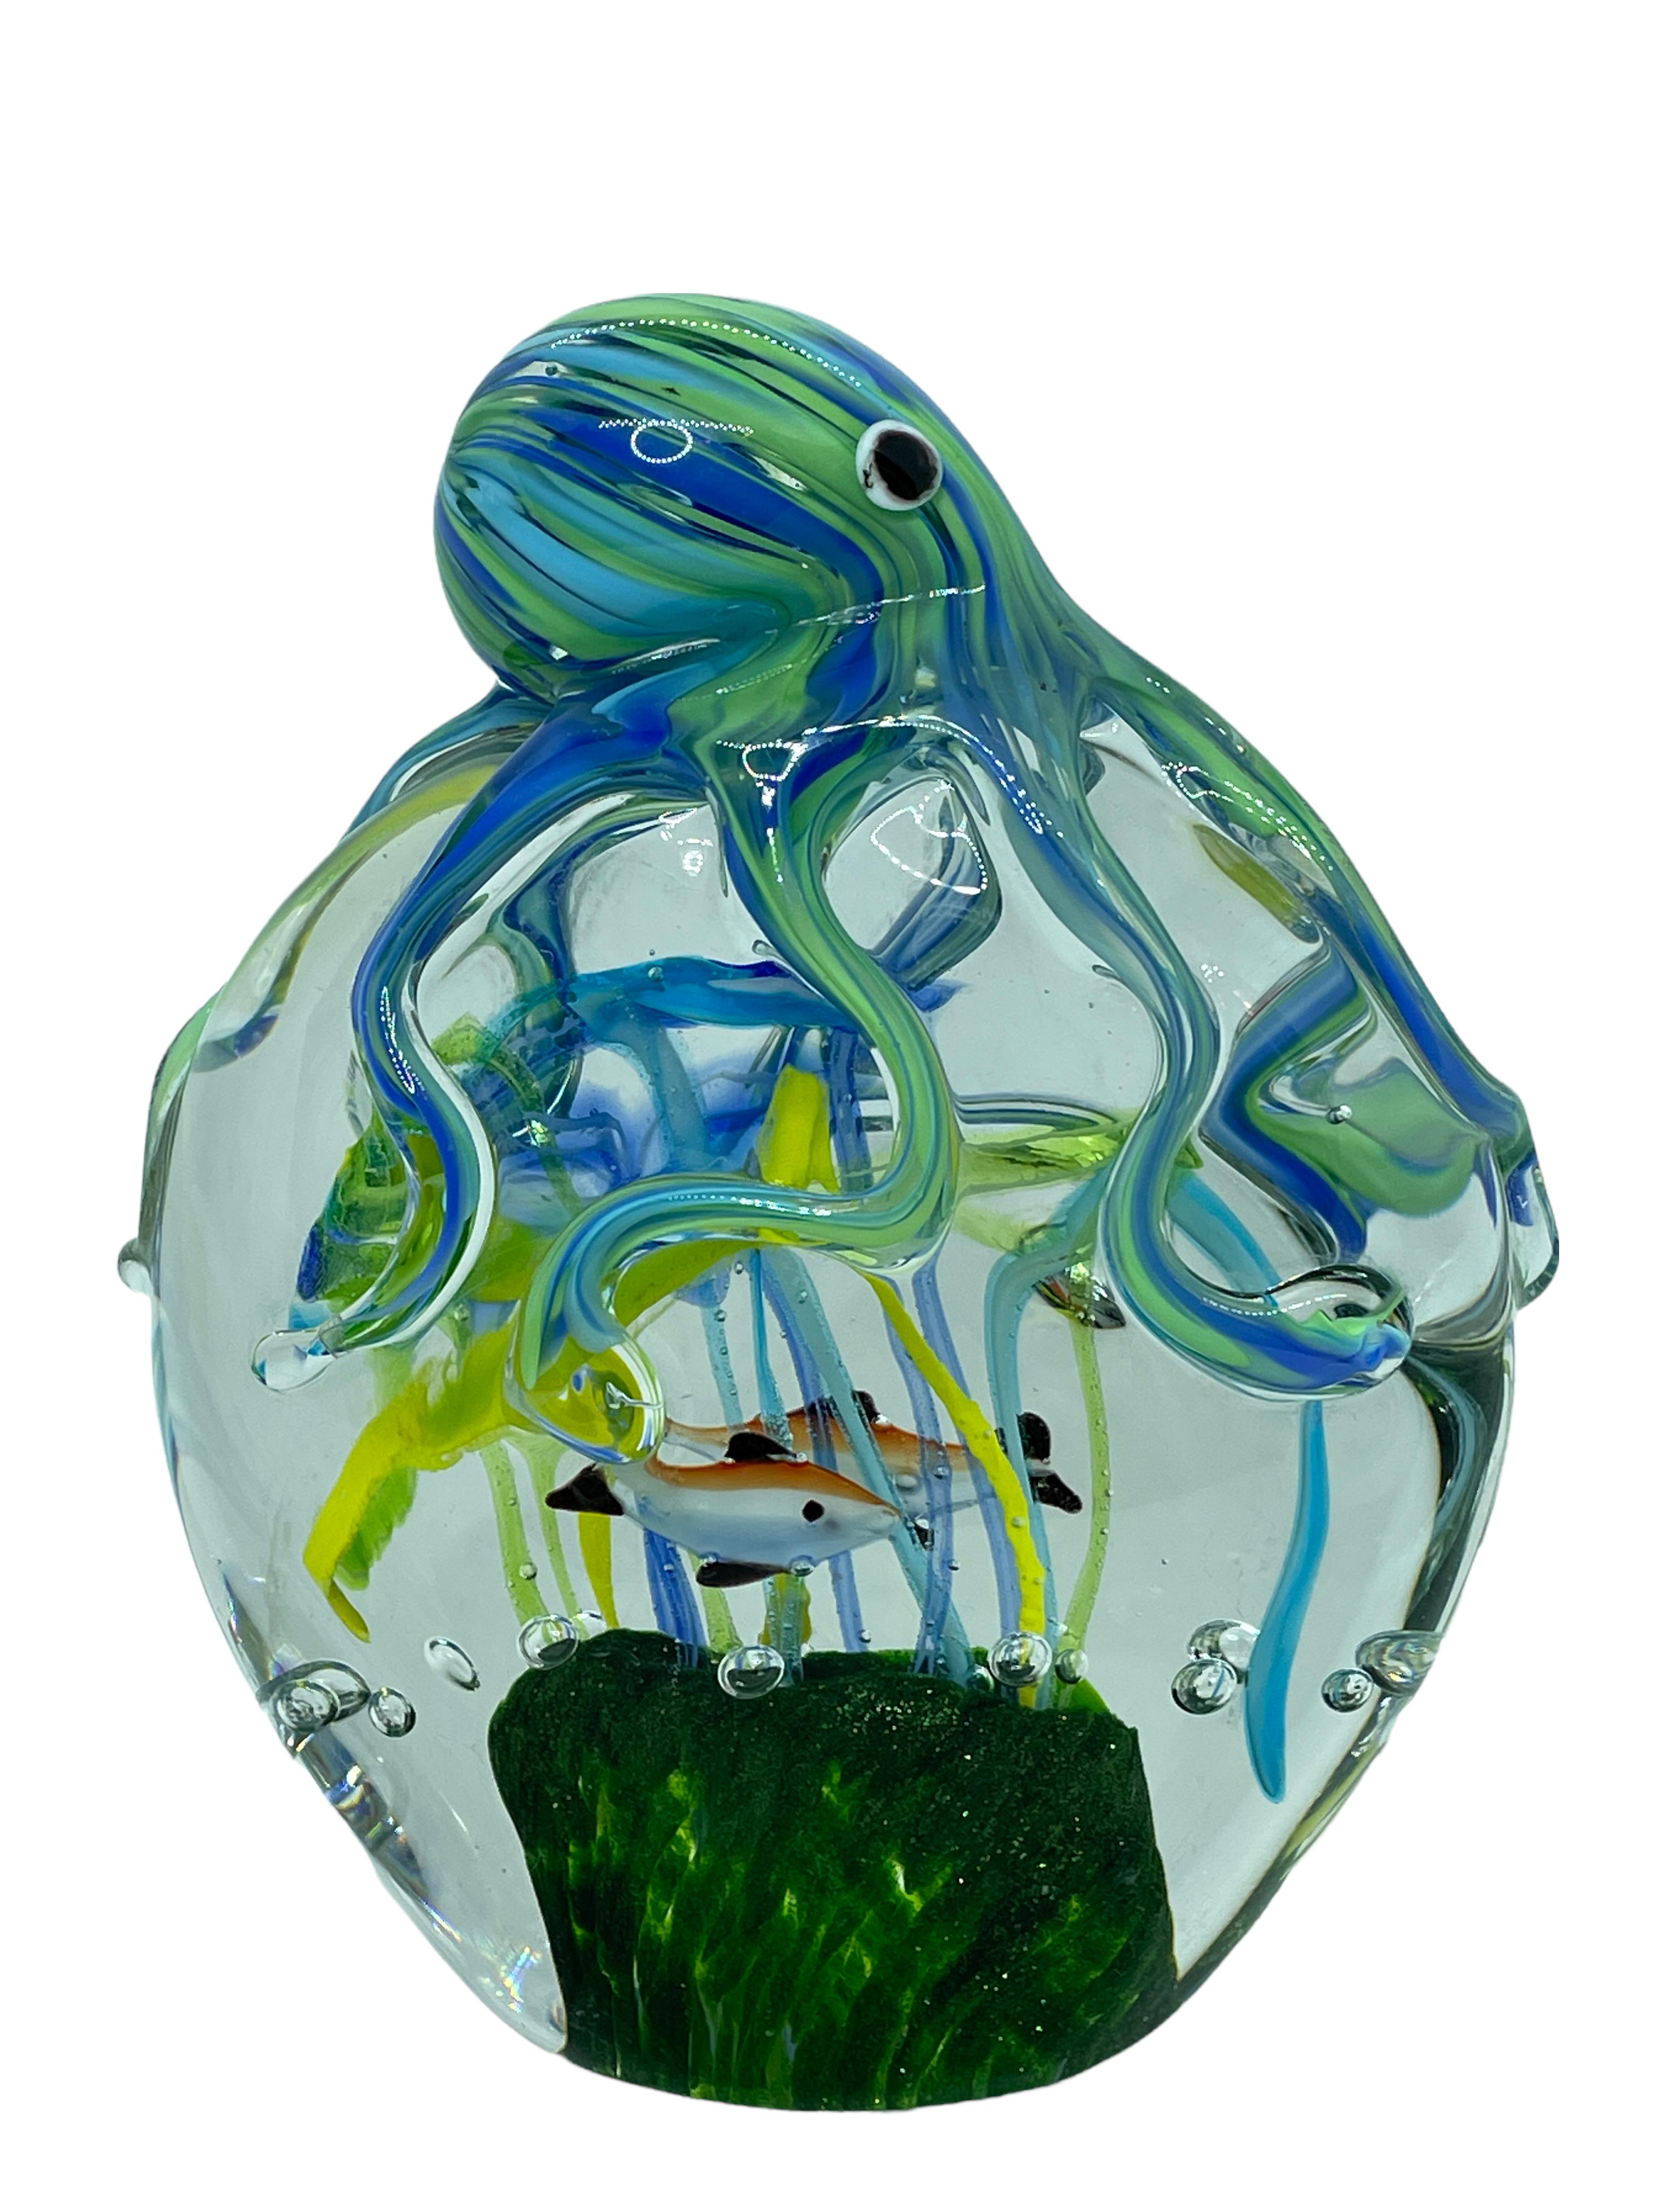 Beautiful Murano hand blown aquarium Italian art glass paper weight. Showing a octopus holding a reef with fish aquarium. Colors are a different shades of blue, white, black and clear. A beautiful nice addition to your desktop or as a decorative